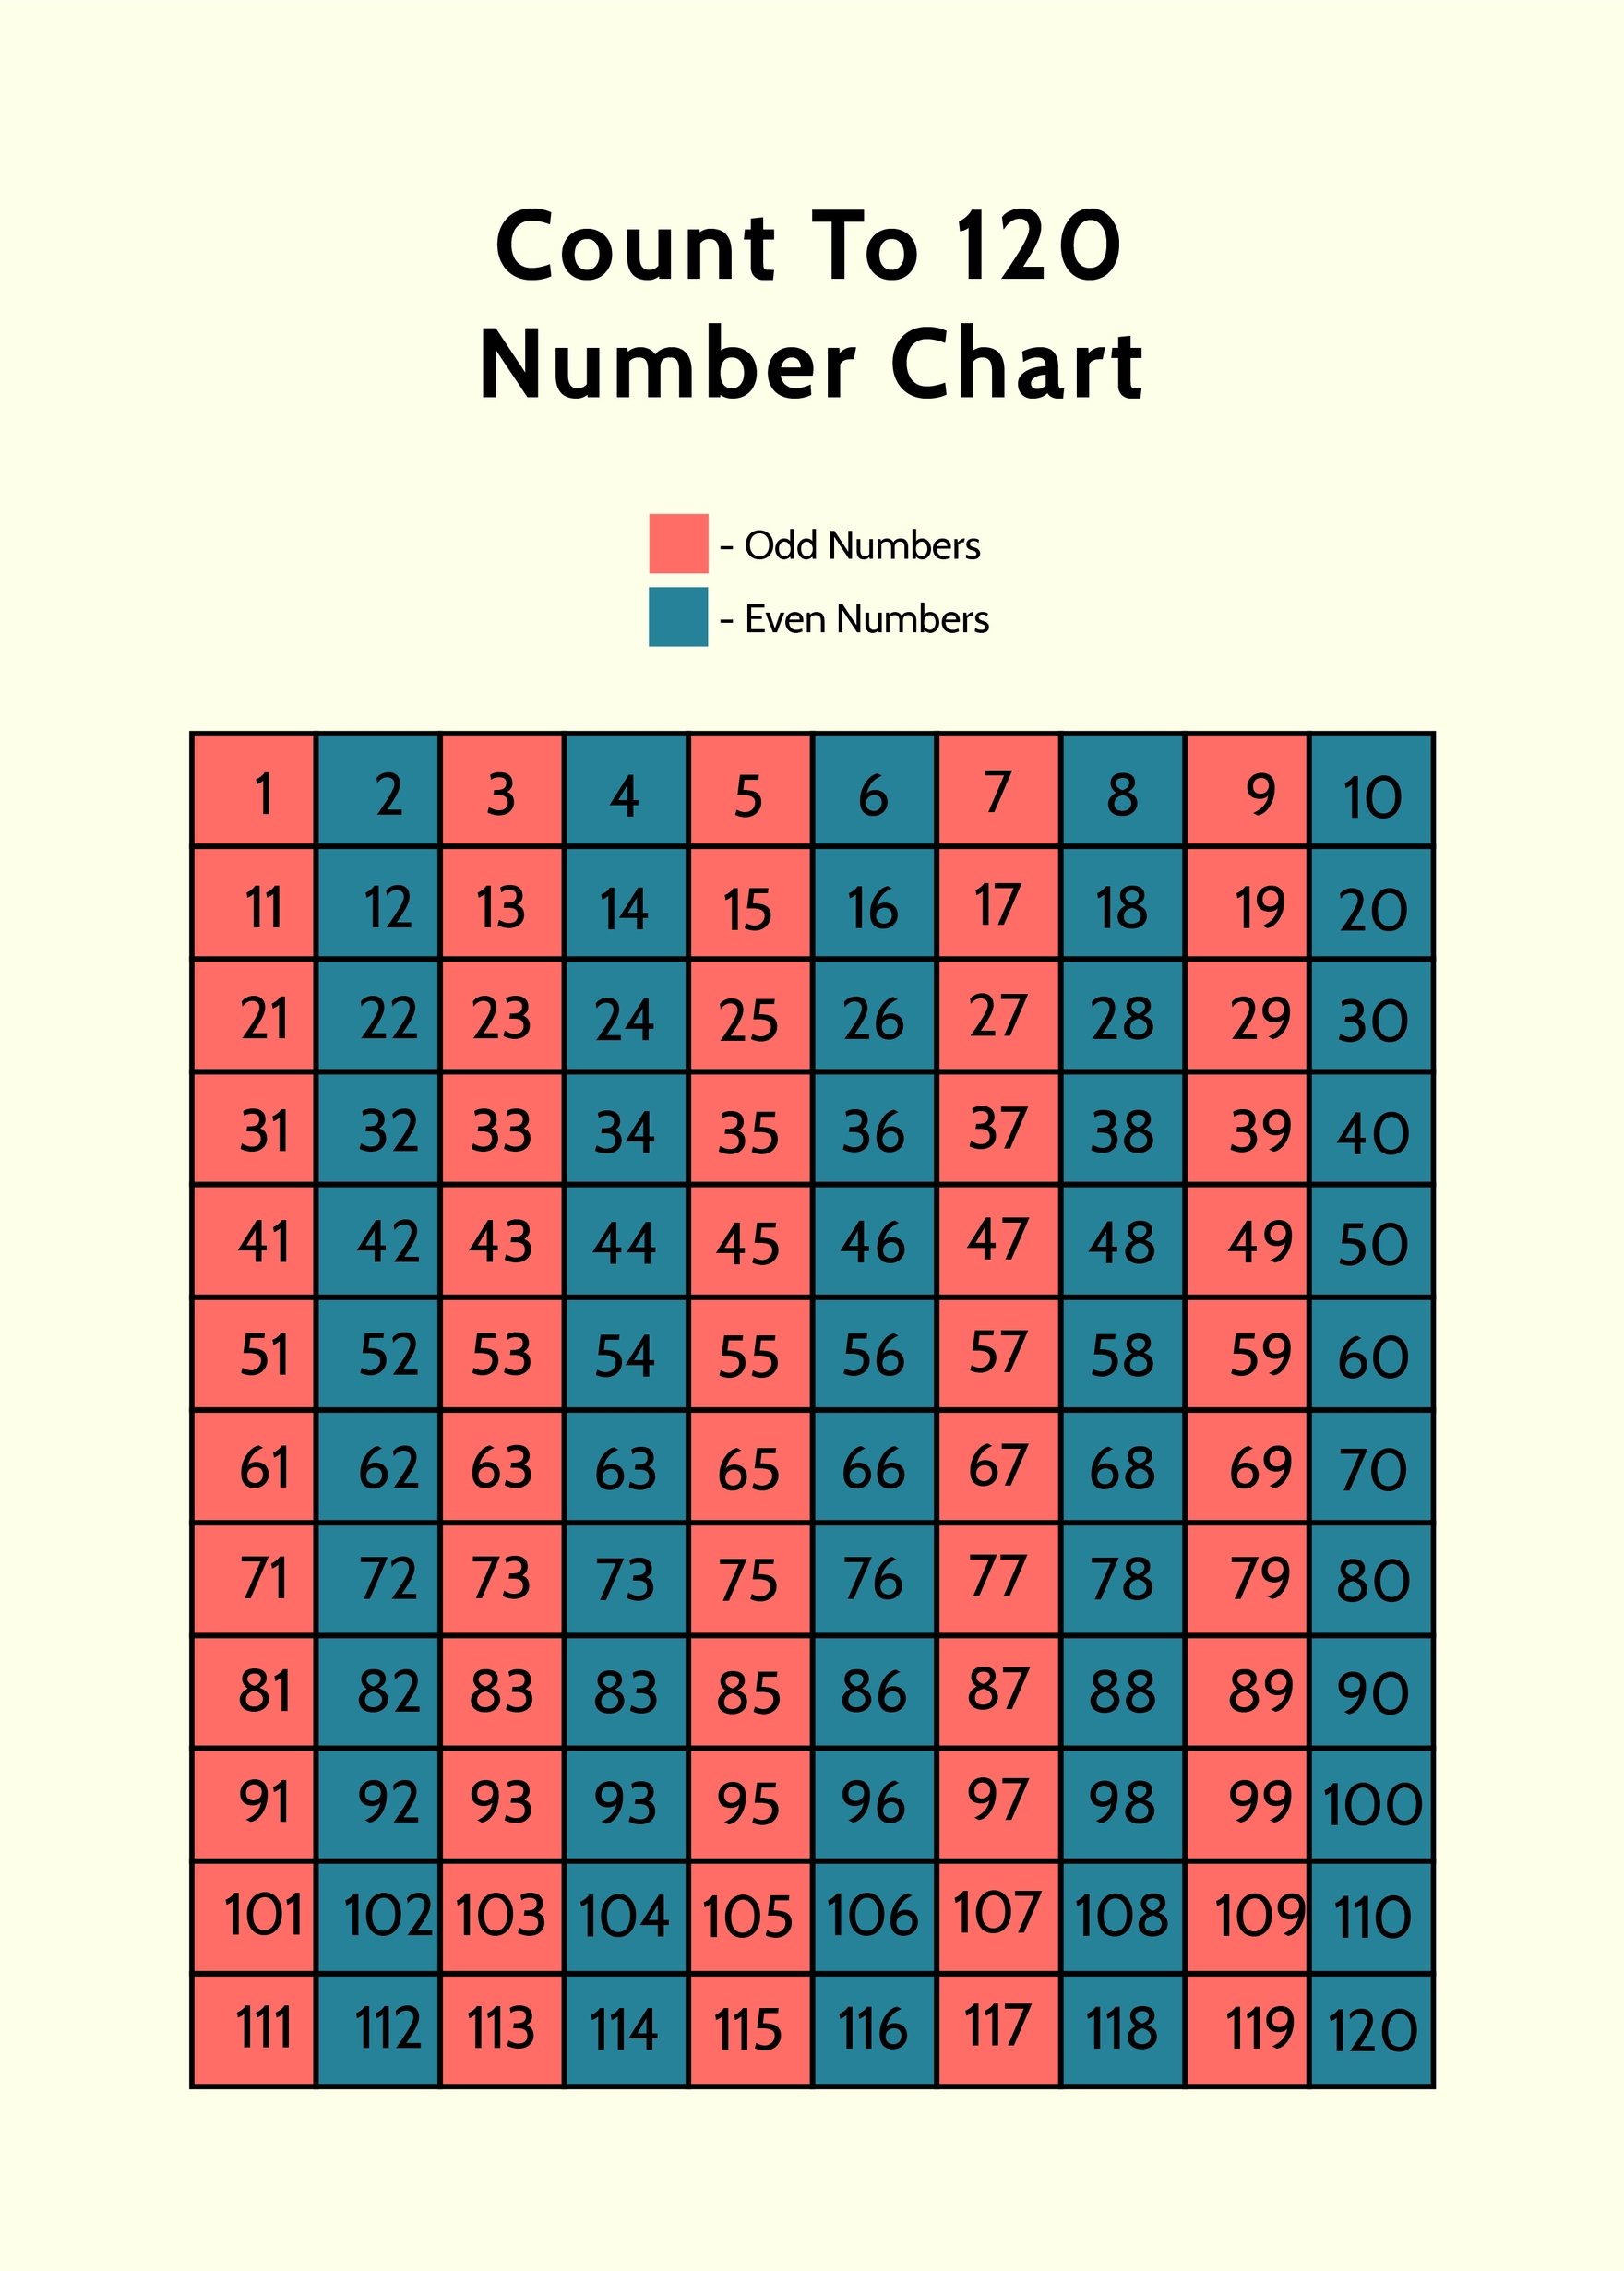 Count To 120 Number Chart